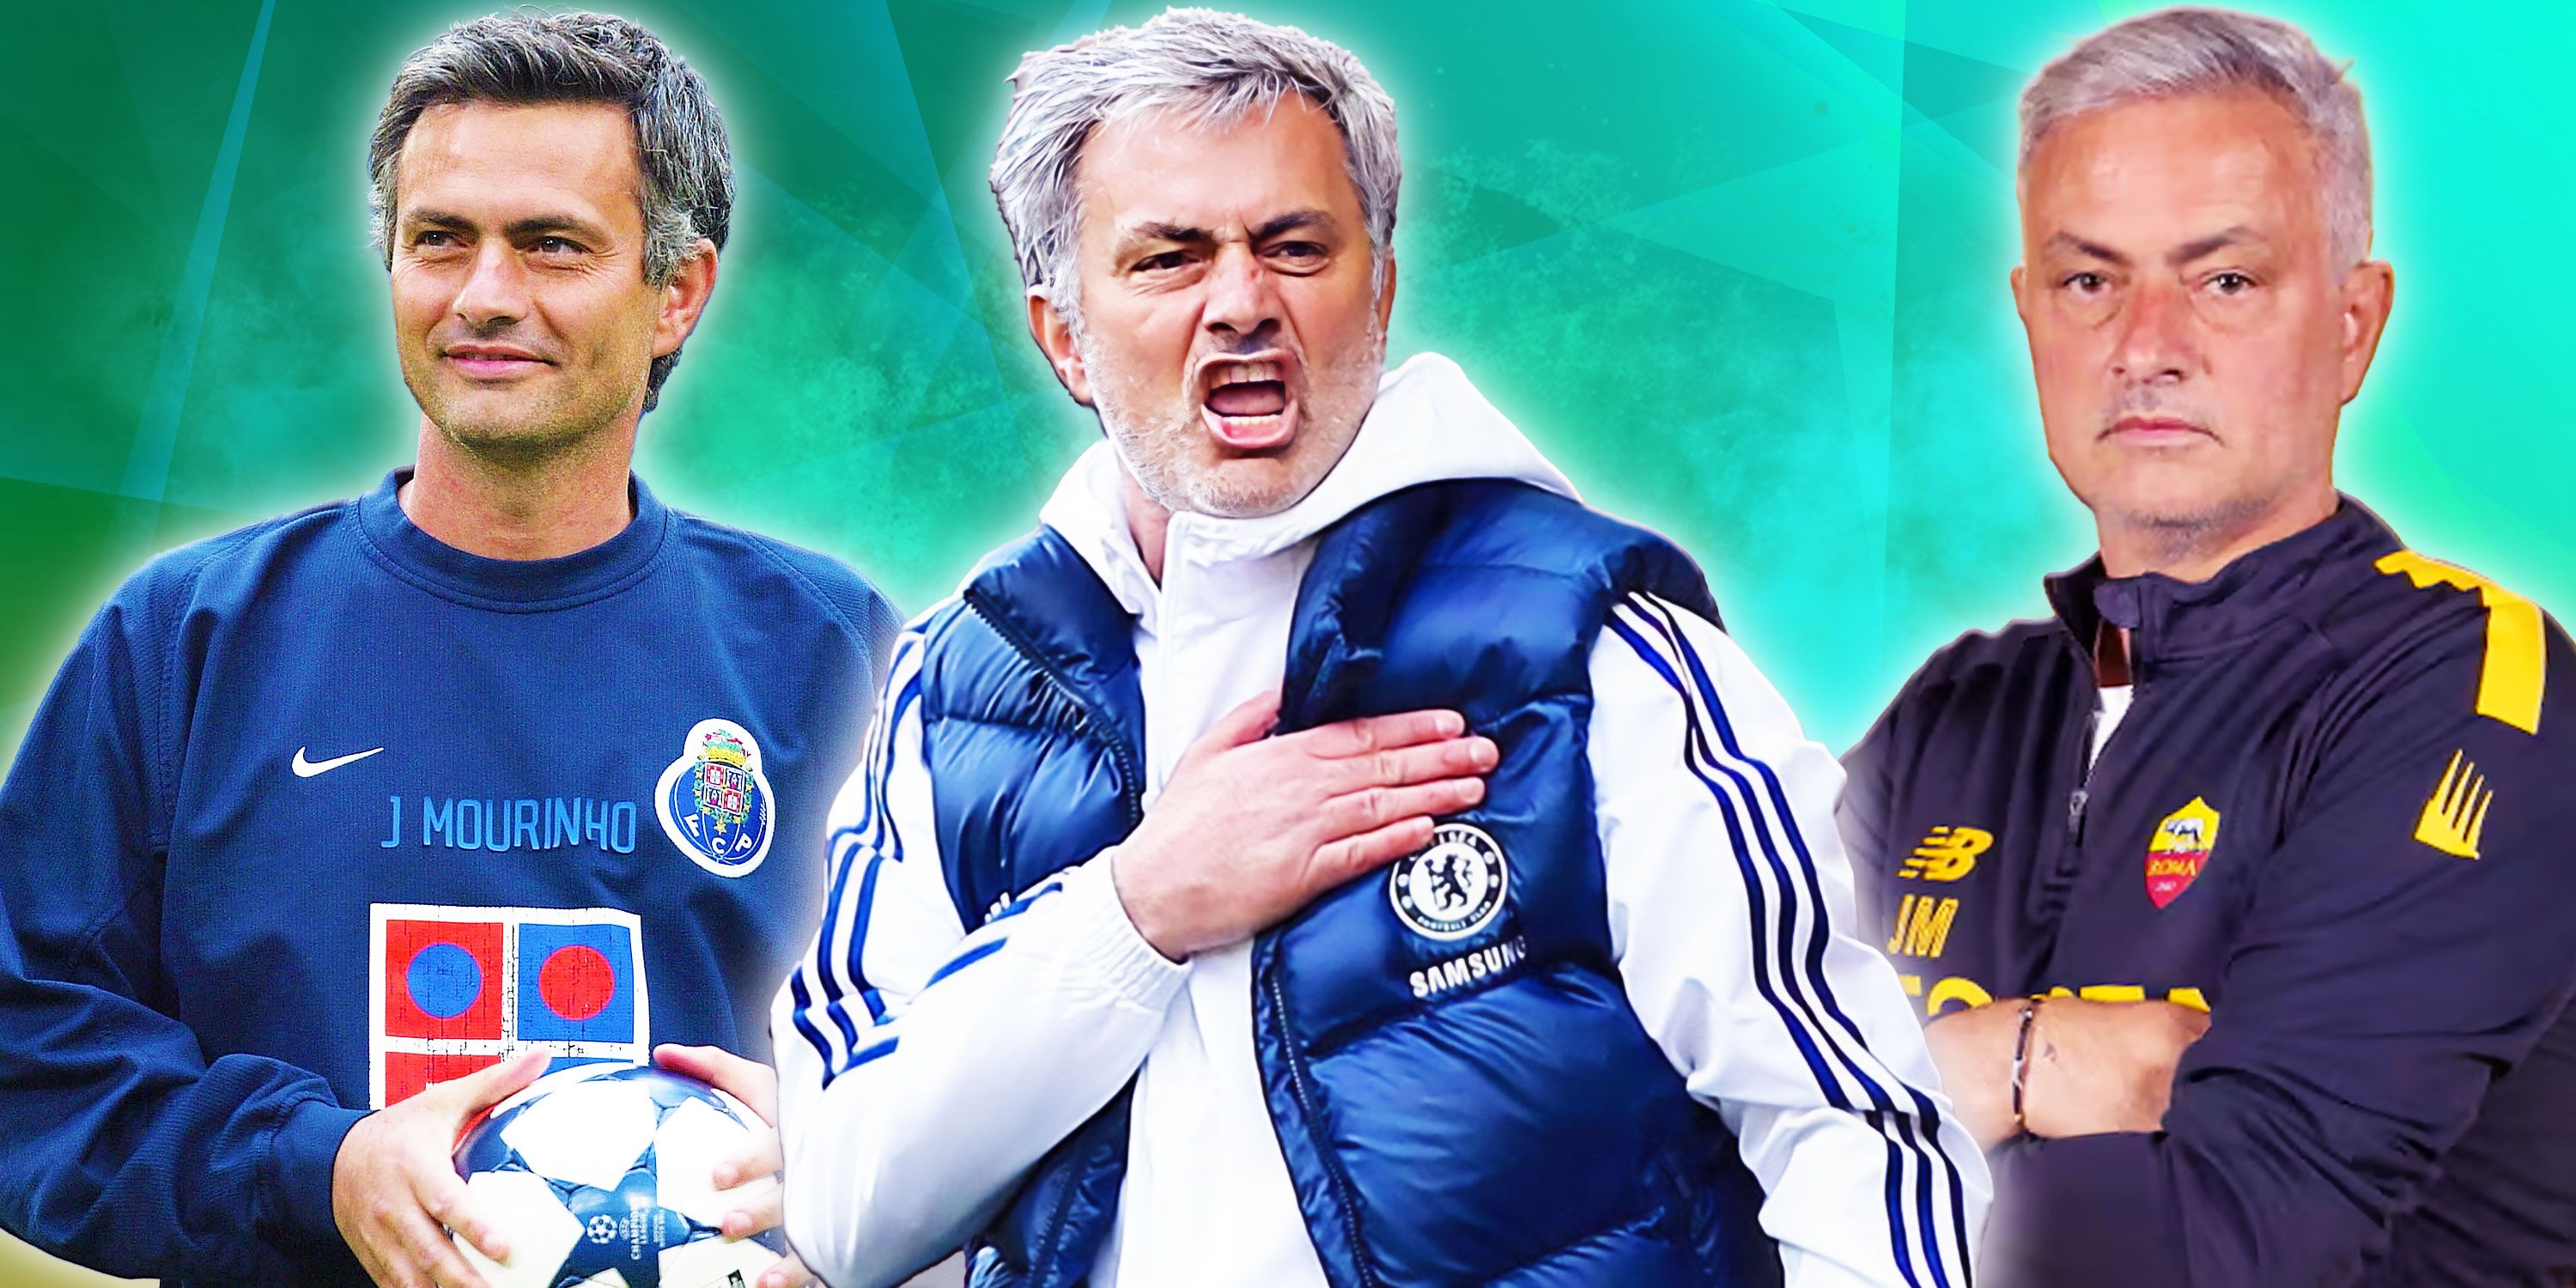 Why Jose Mourinho is called The Special One